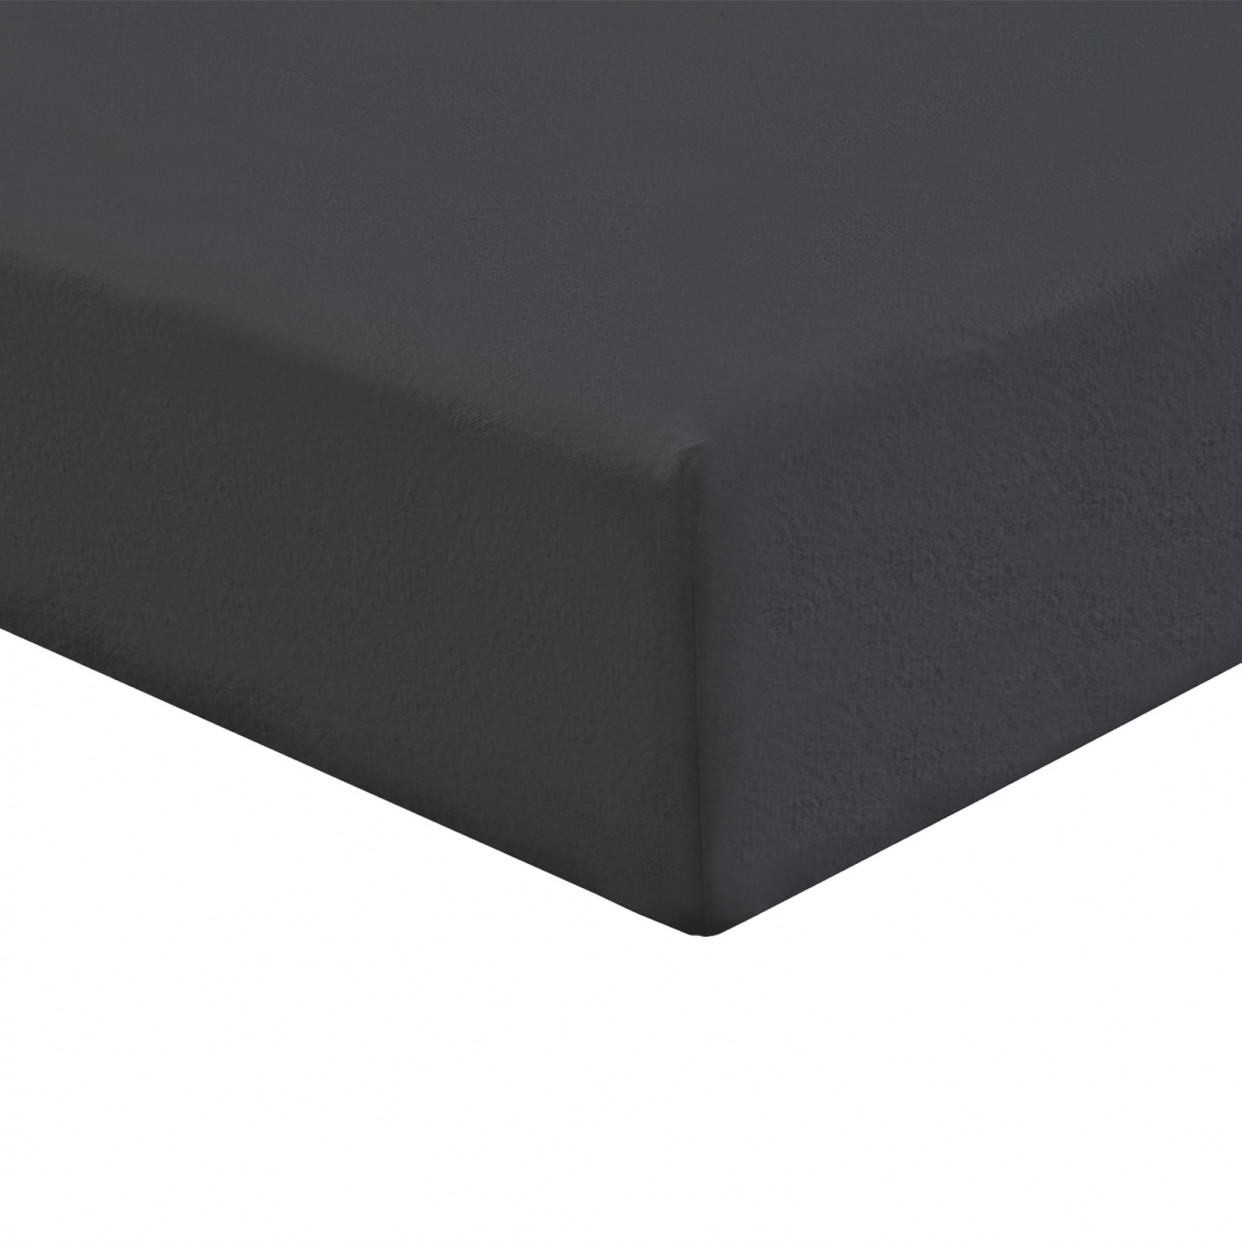 Highams 100% Brushed Cotton Flannelette Fitted Sheet - Plain Charcoal Black>